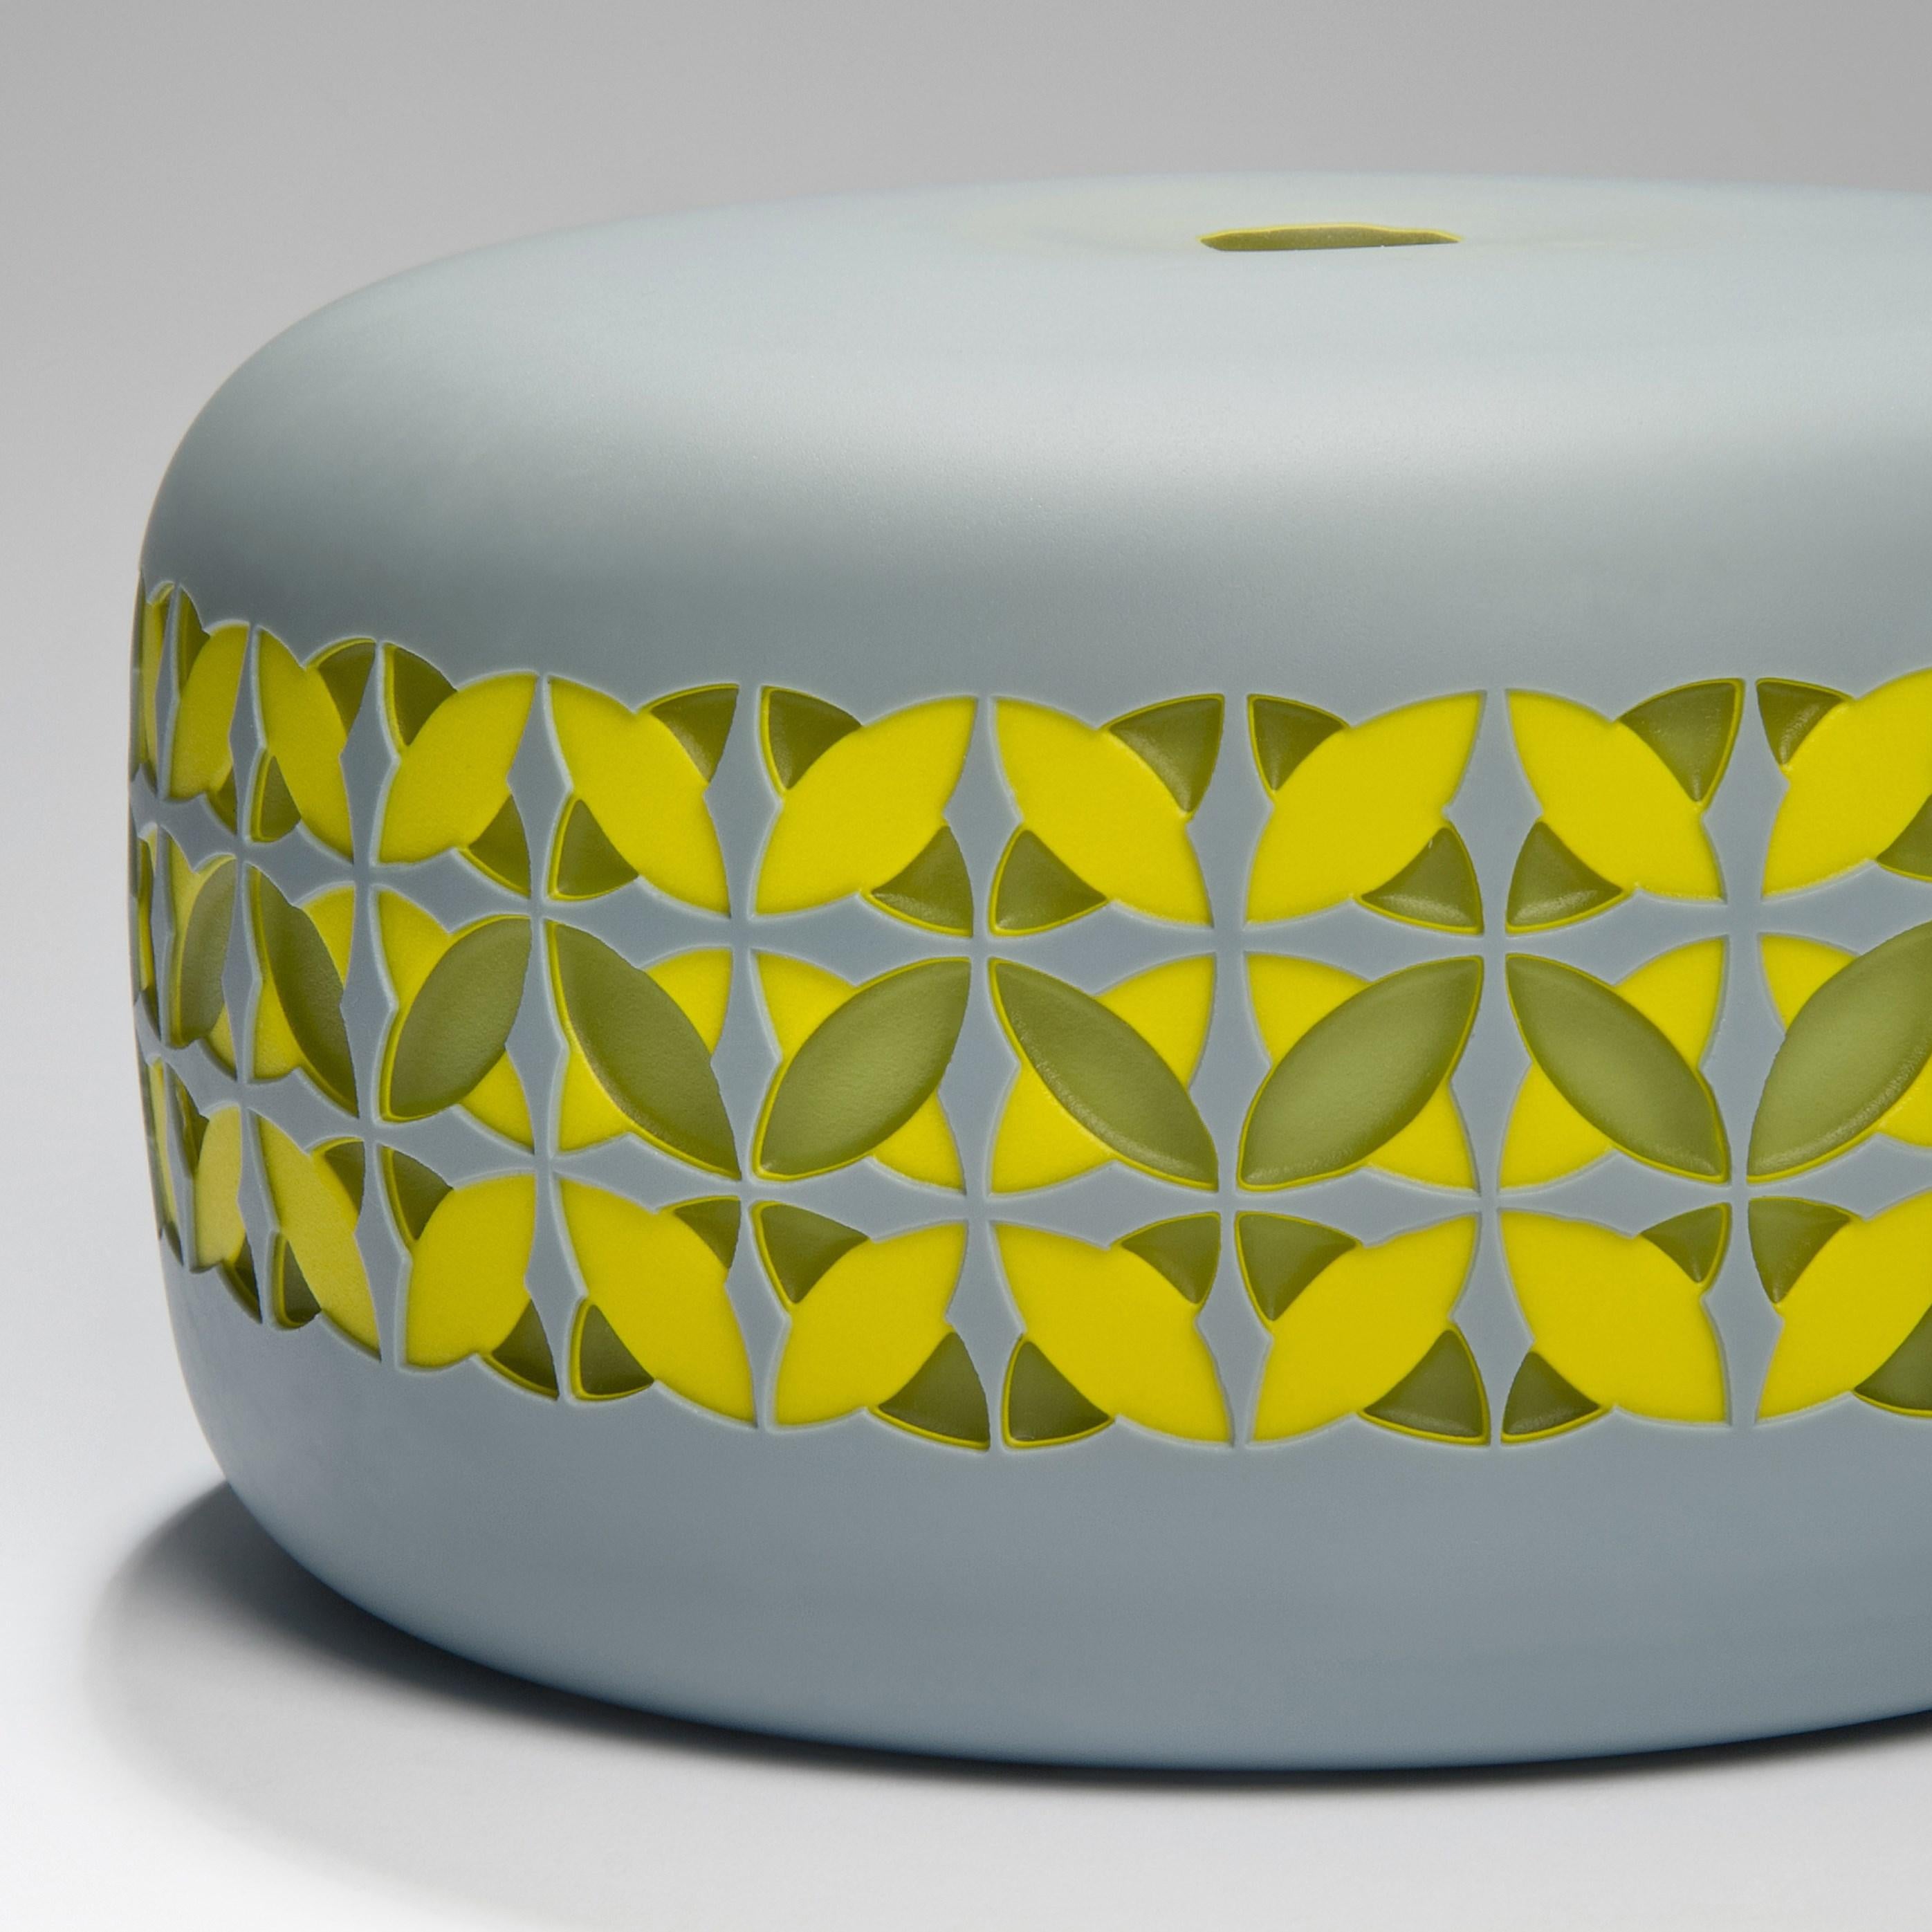 Organic Modern Going Round in Circles III, a Grey & Yellow Glass Artwork by Sarah Wiberley For Sale